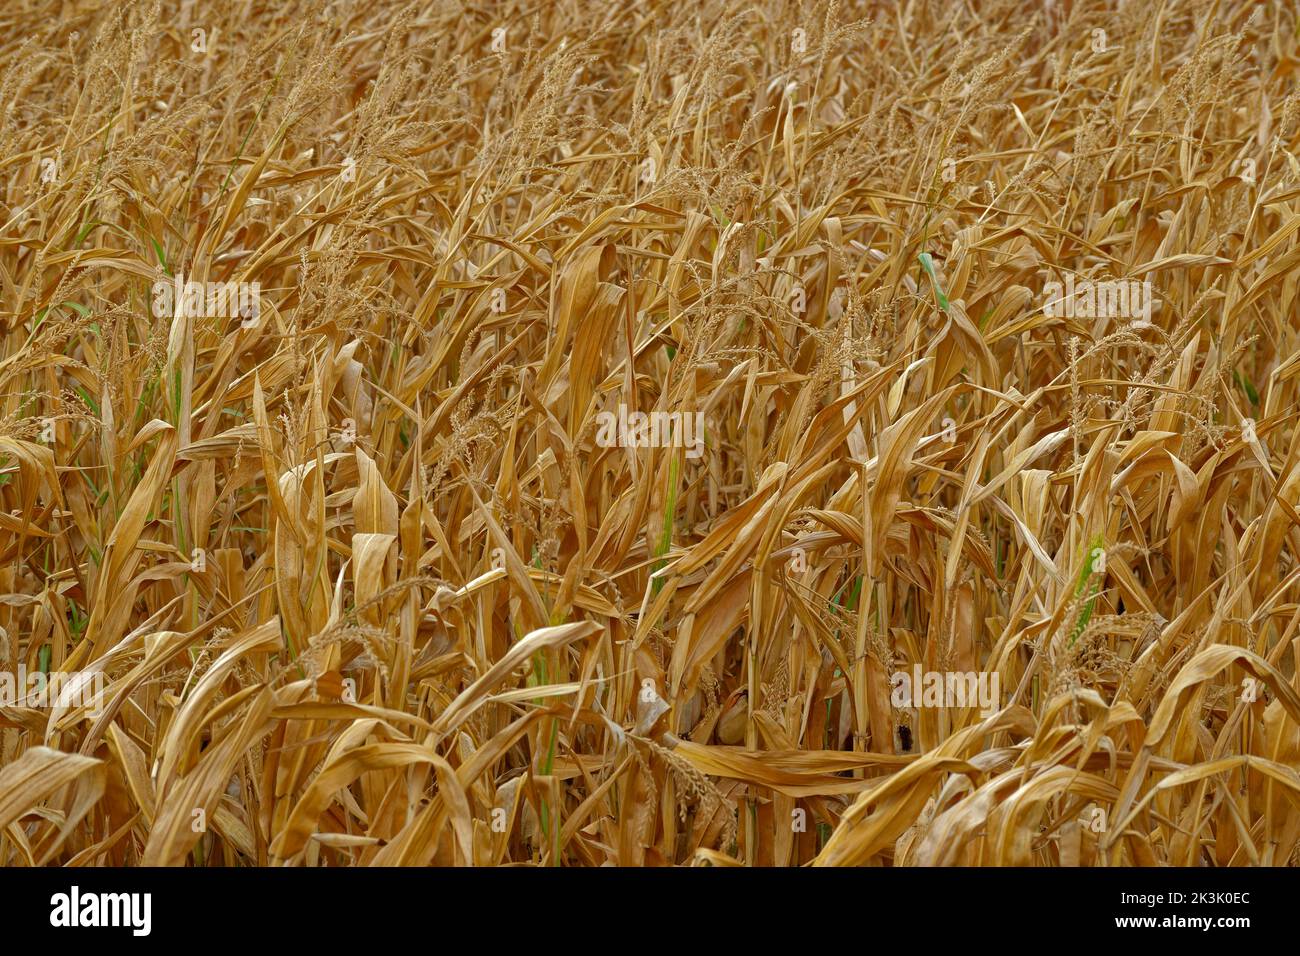 Corn Maize crop failure due to drought. Corn husks not formed. Stock Photo